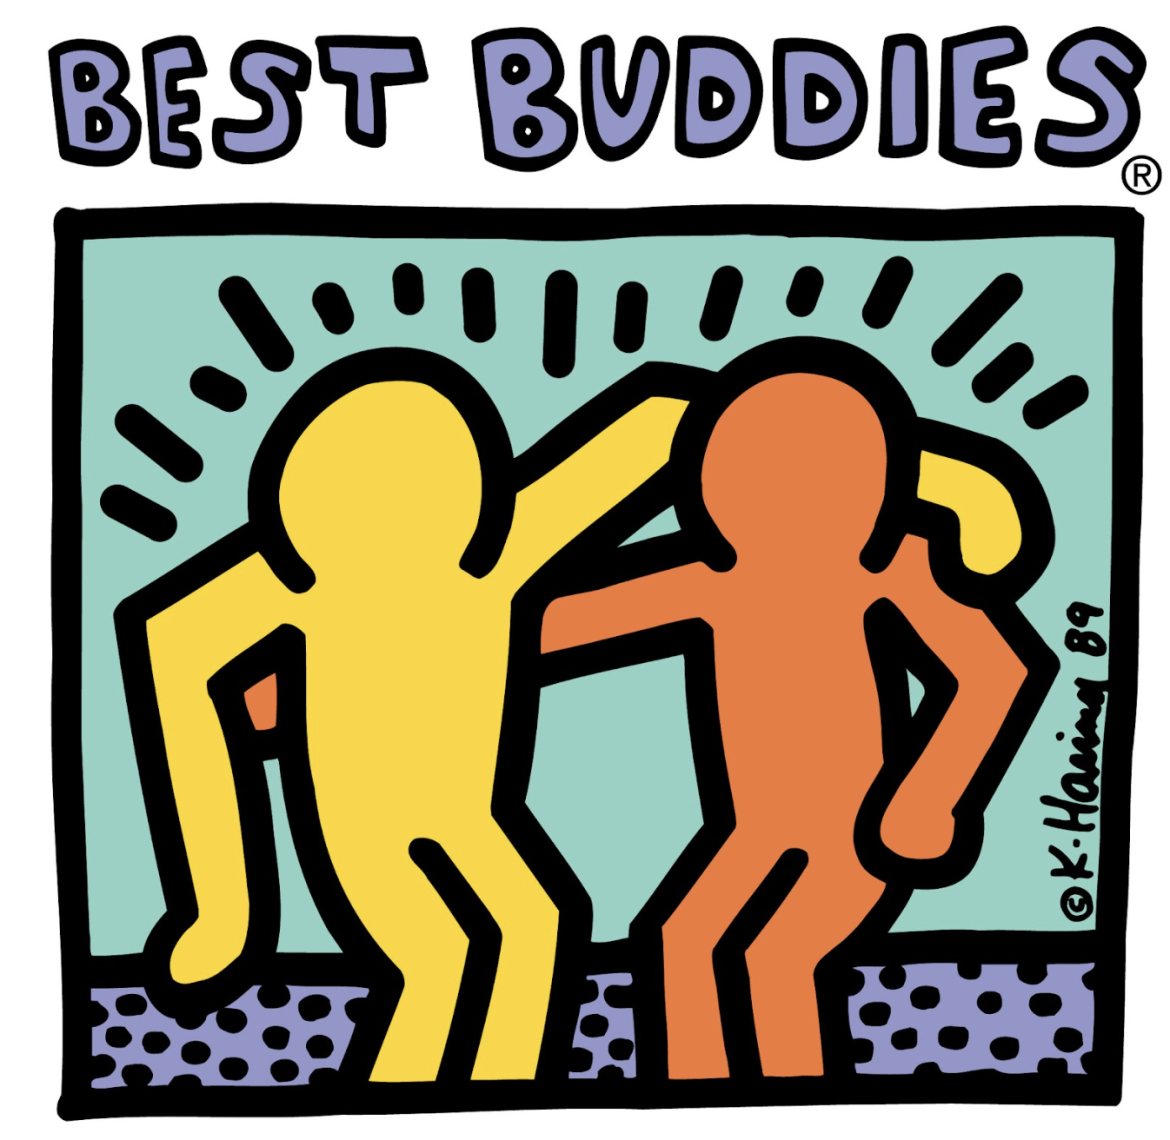 Best Buddies graphic of two people hugging